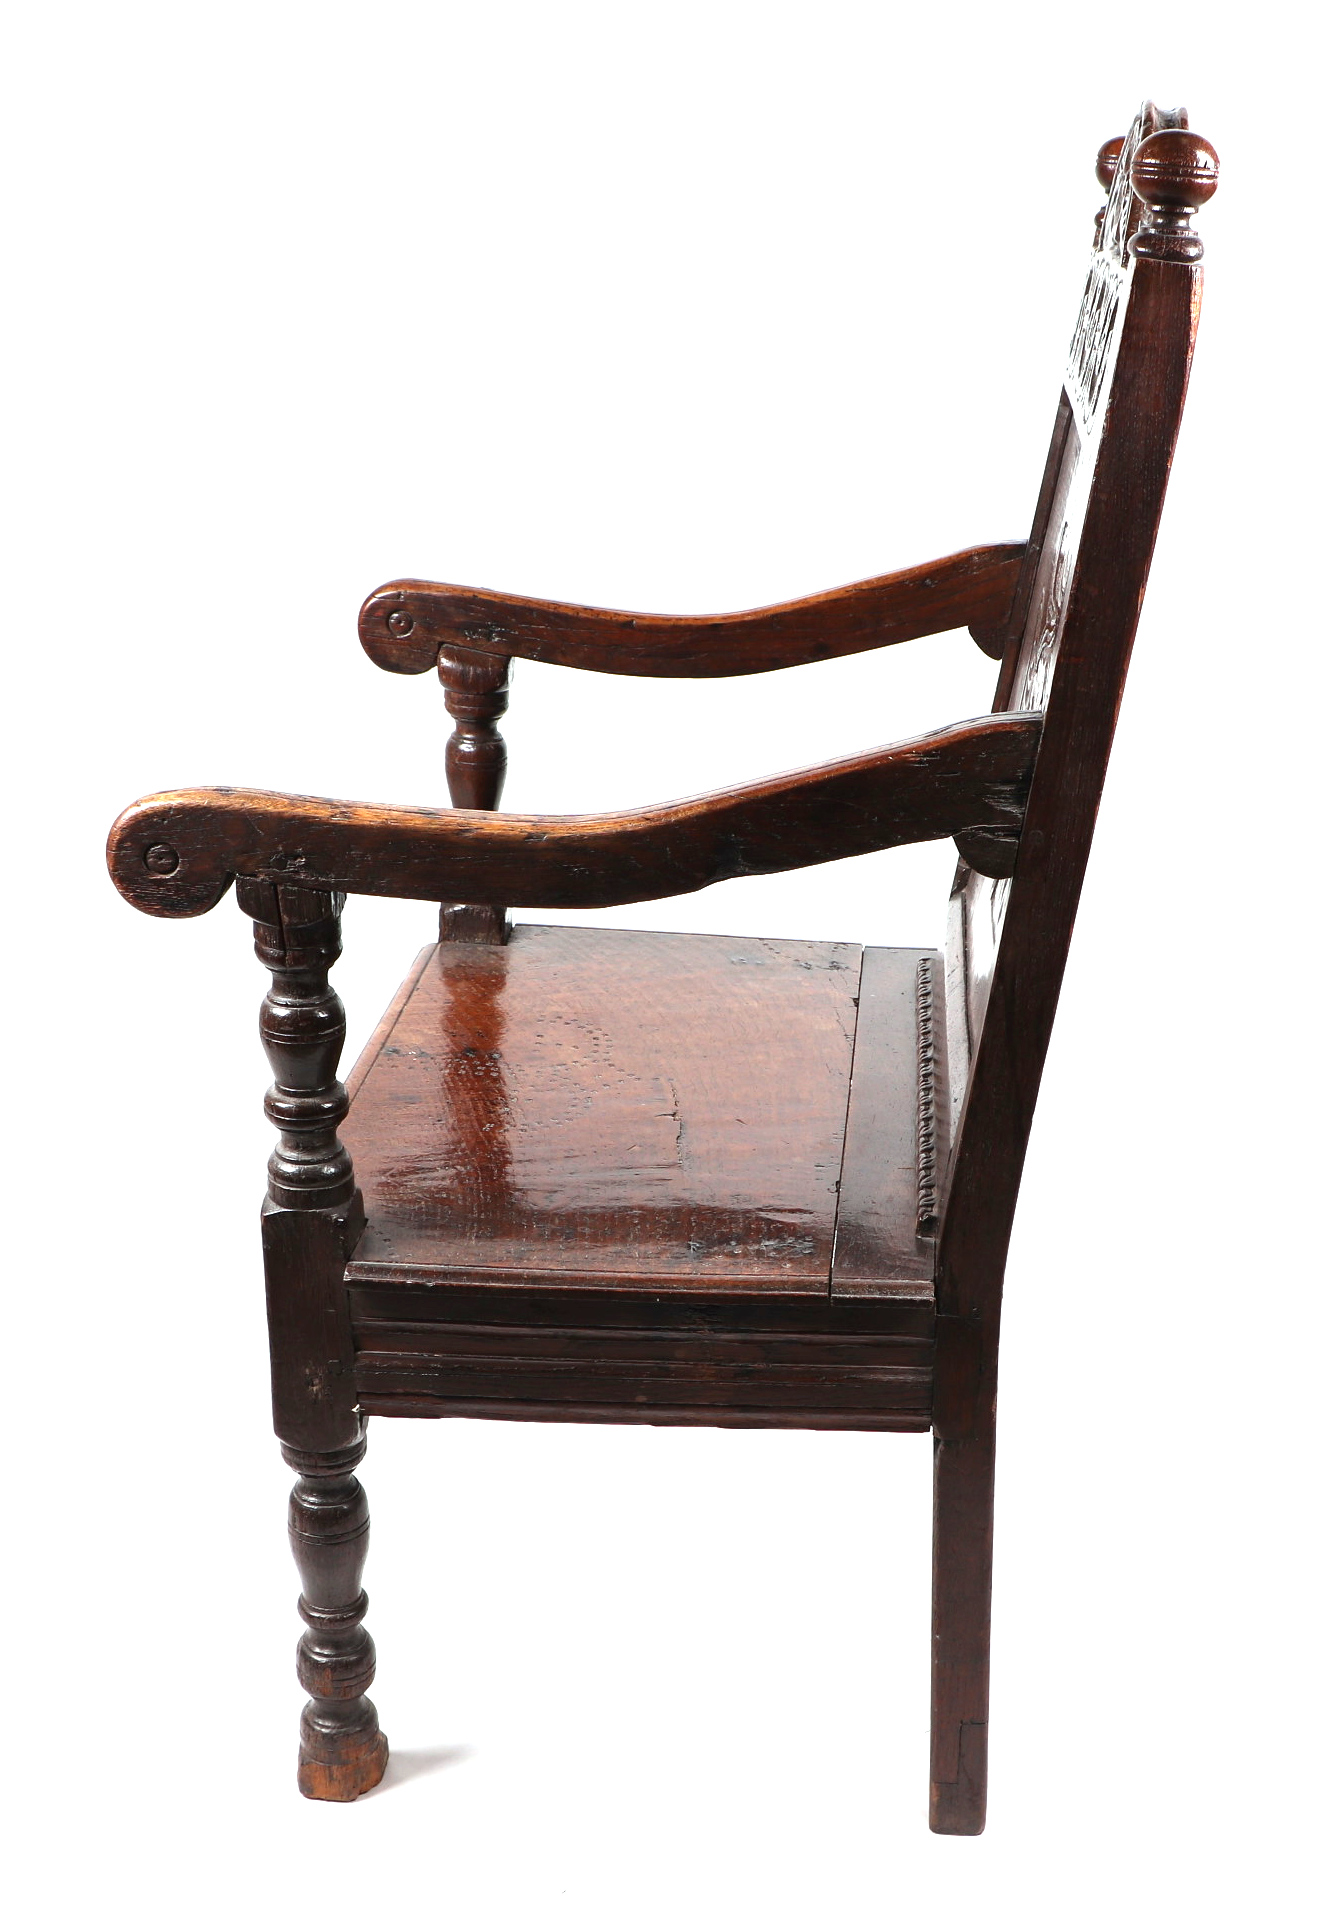 An 18th century style Wainscot type oak chair. - Image 2 of 8